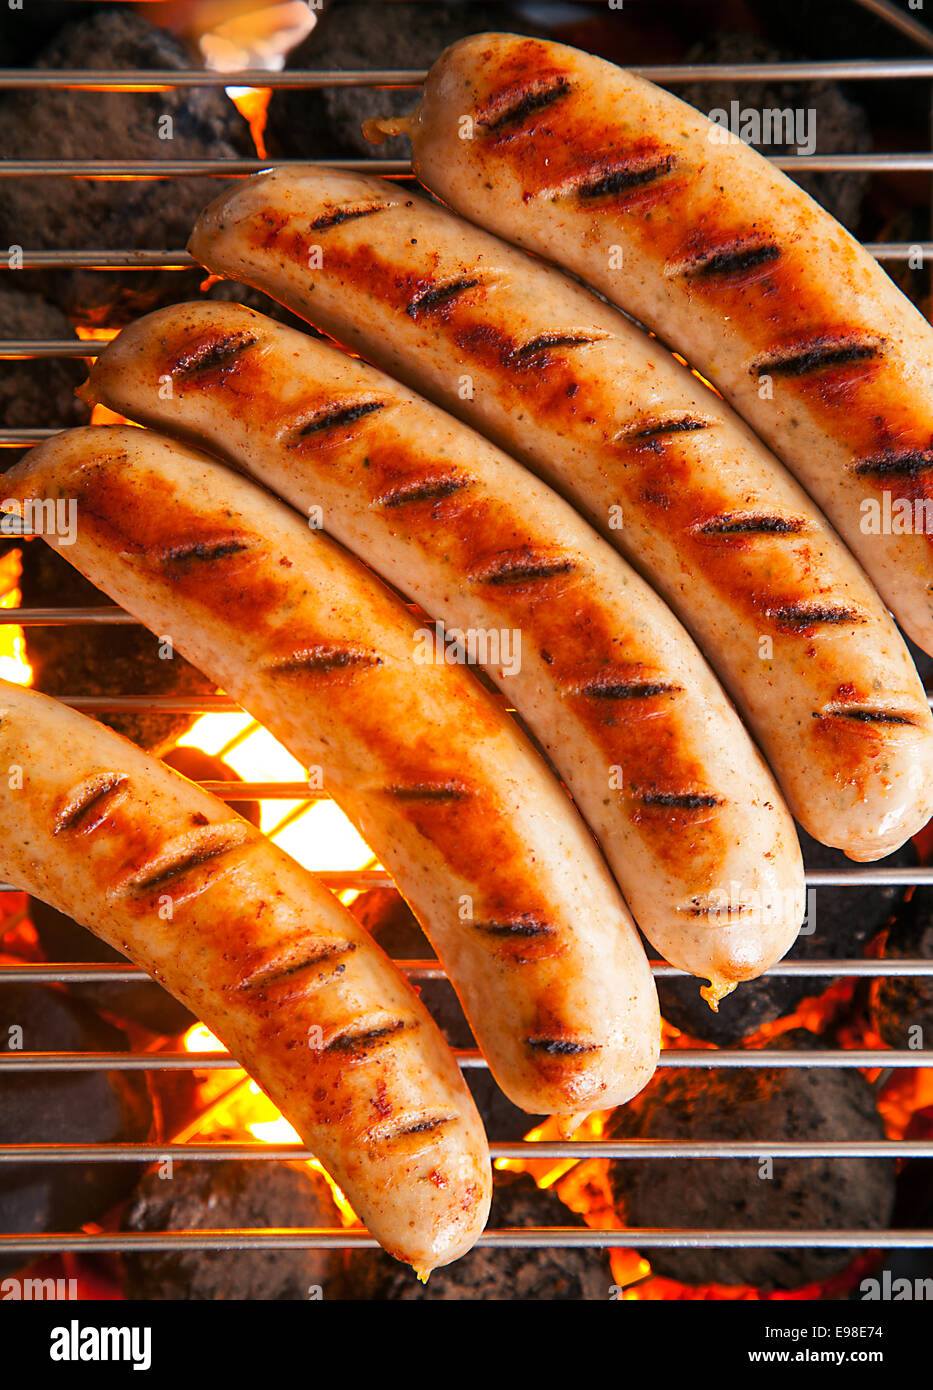 Row of tasty browned seared pork and beef sausages cooking over the hot coals on a barbecue fire, close up overhead view Stock Photo